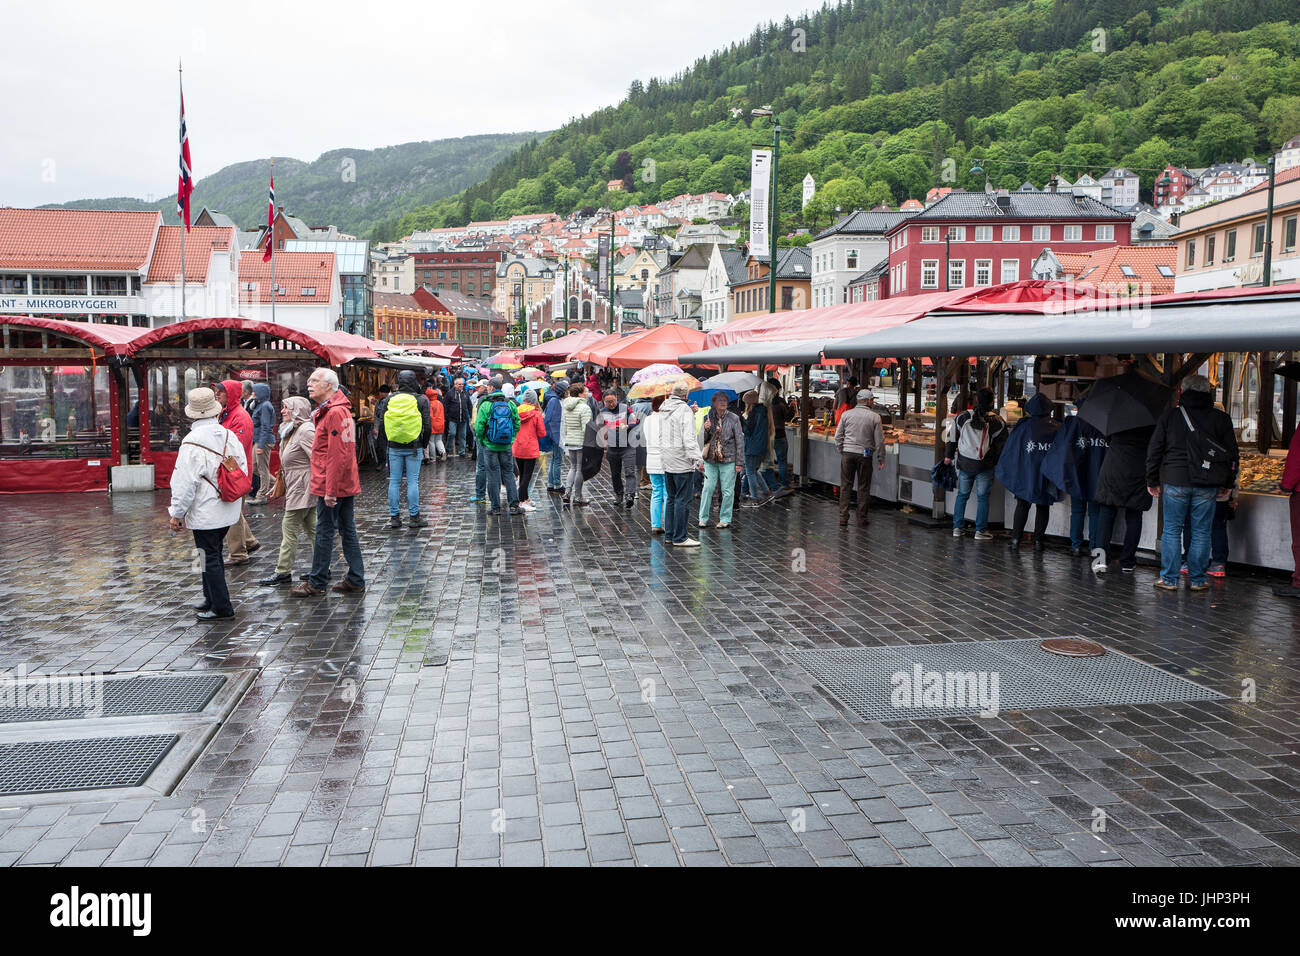 The picturesque Fish Market in Bergen is one of Norway's most visited outdoors markets. The Fish Market sells seafood, fruit and vegetables. Stock Photo